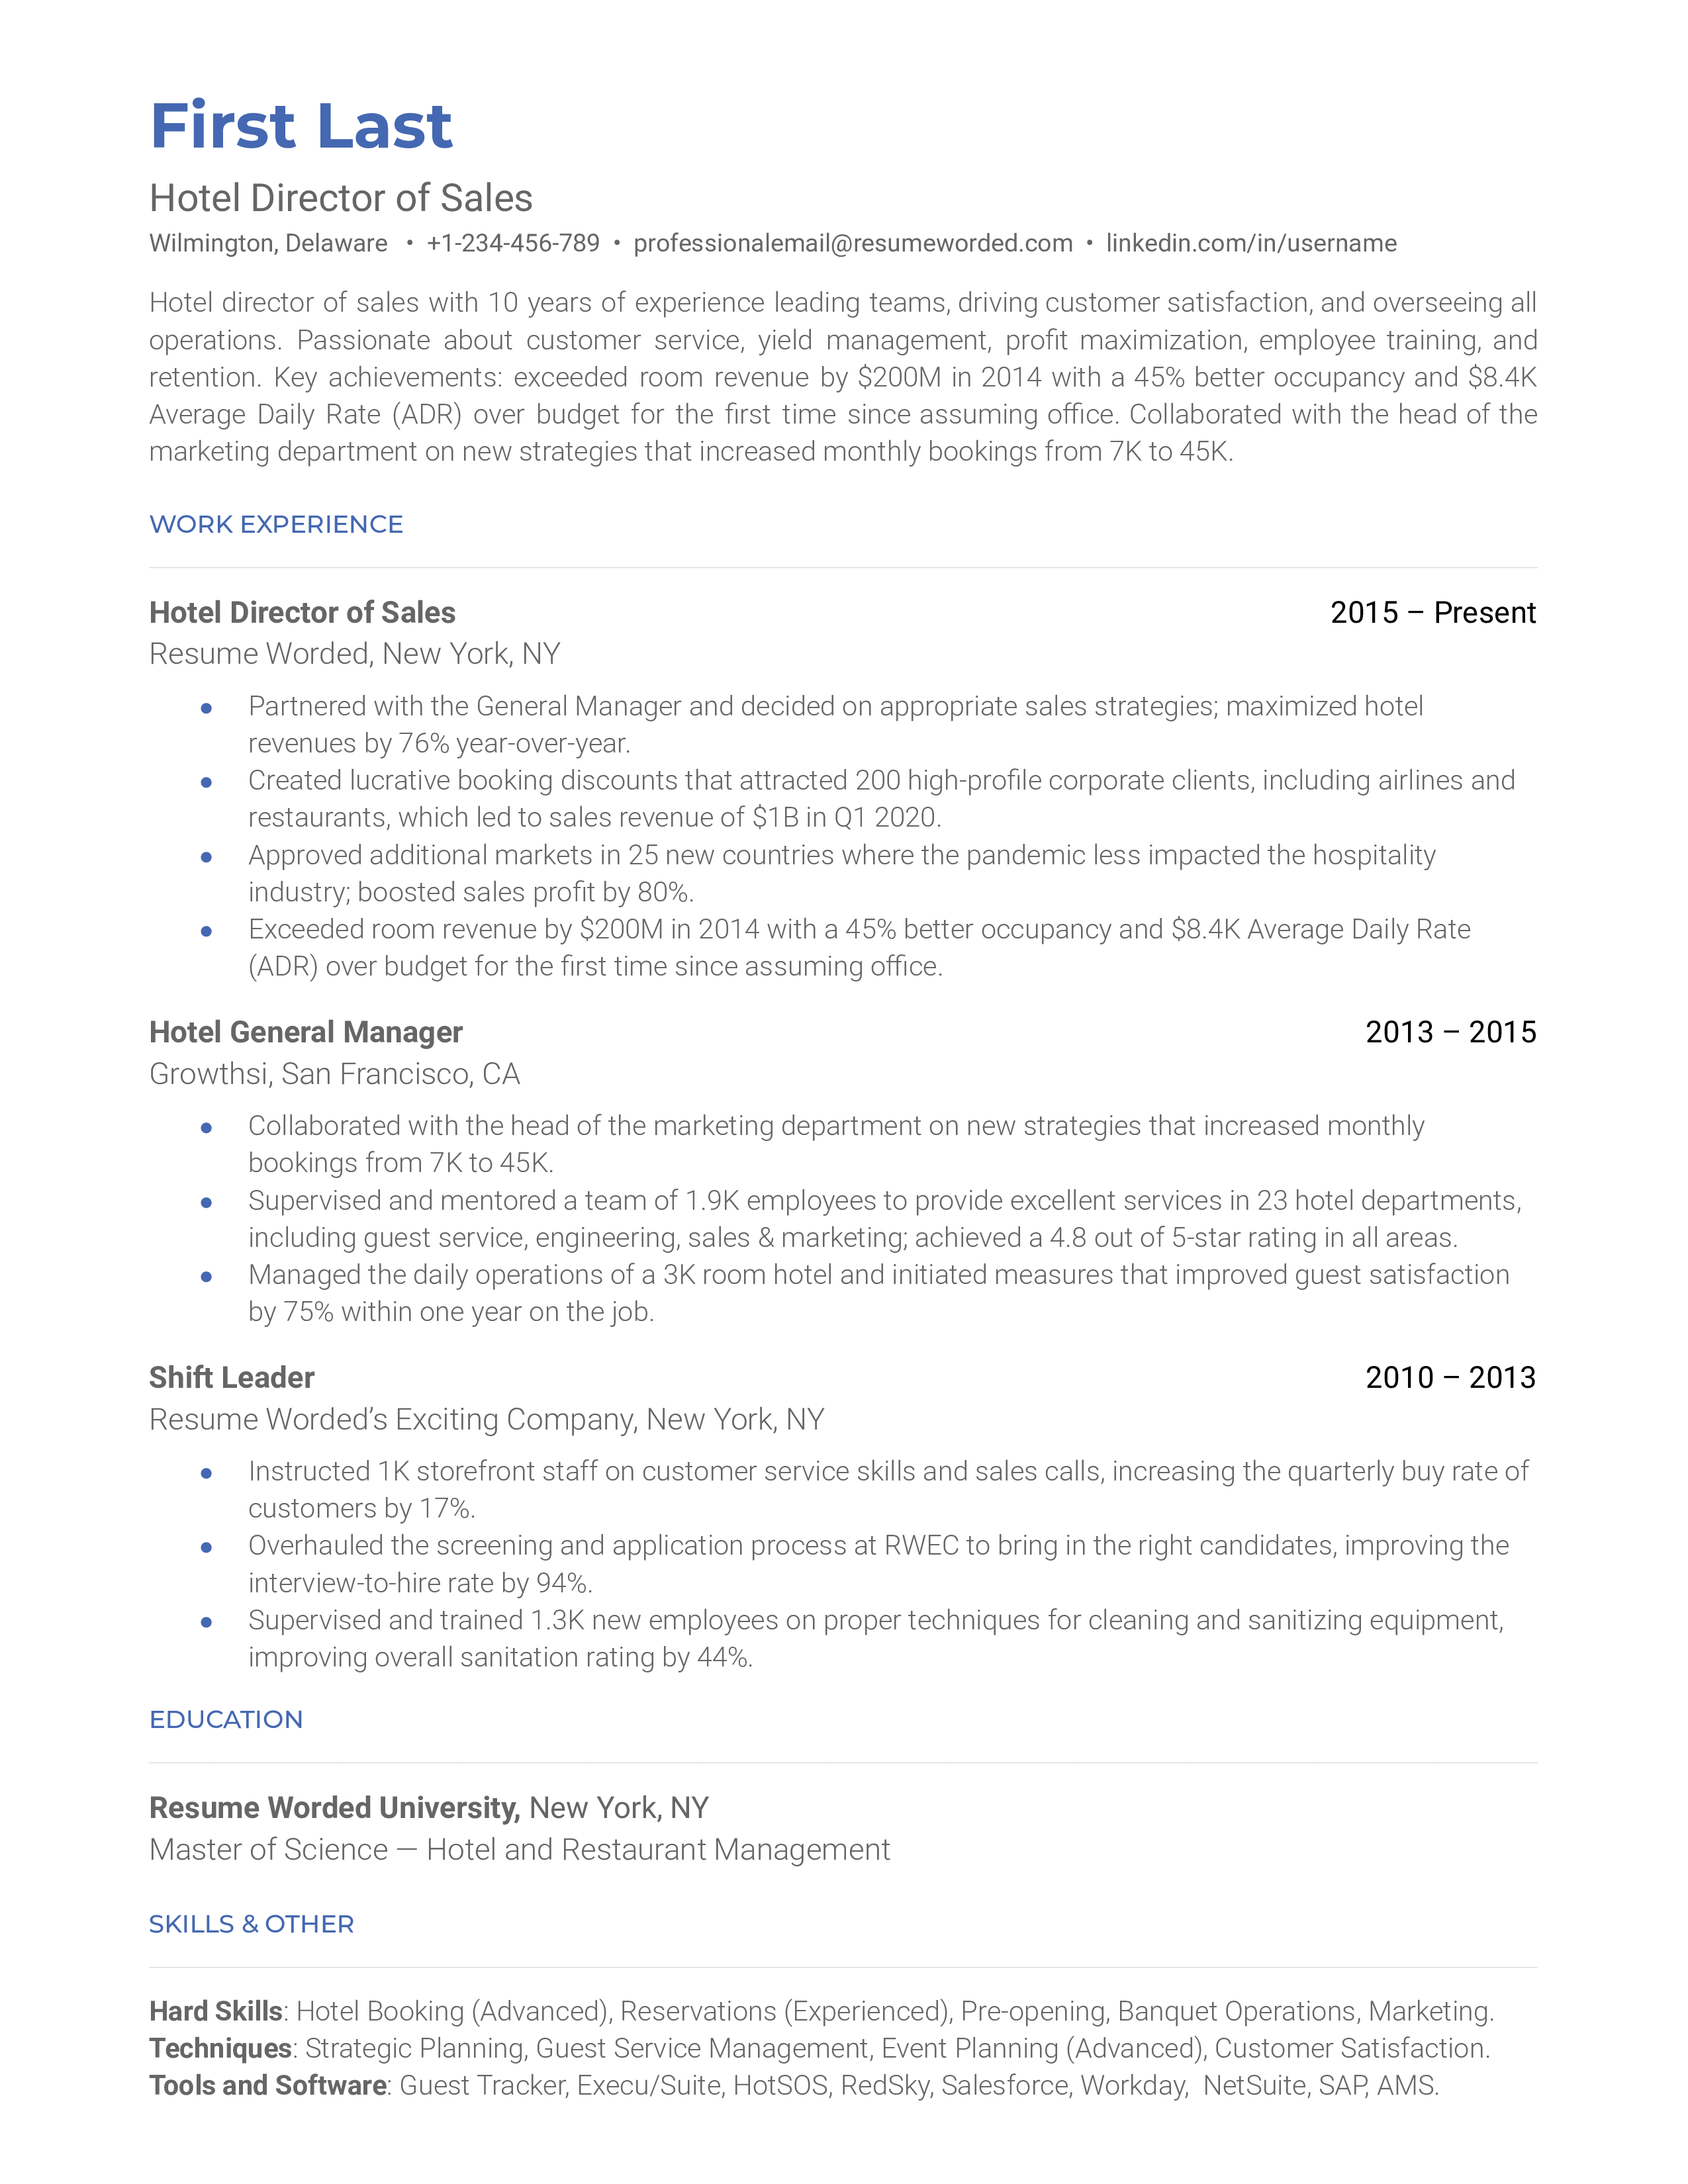 A hotel director of sales resume template tailored to the hospitality industry